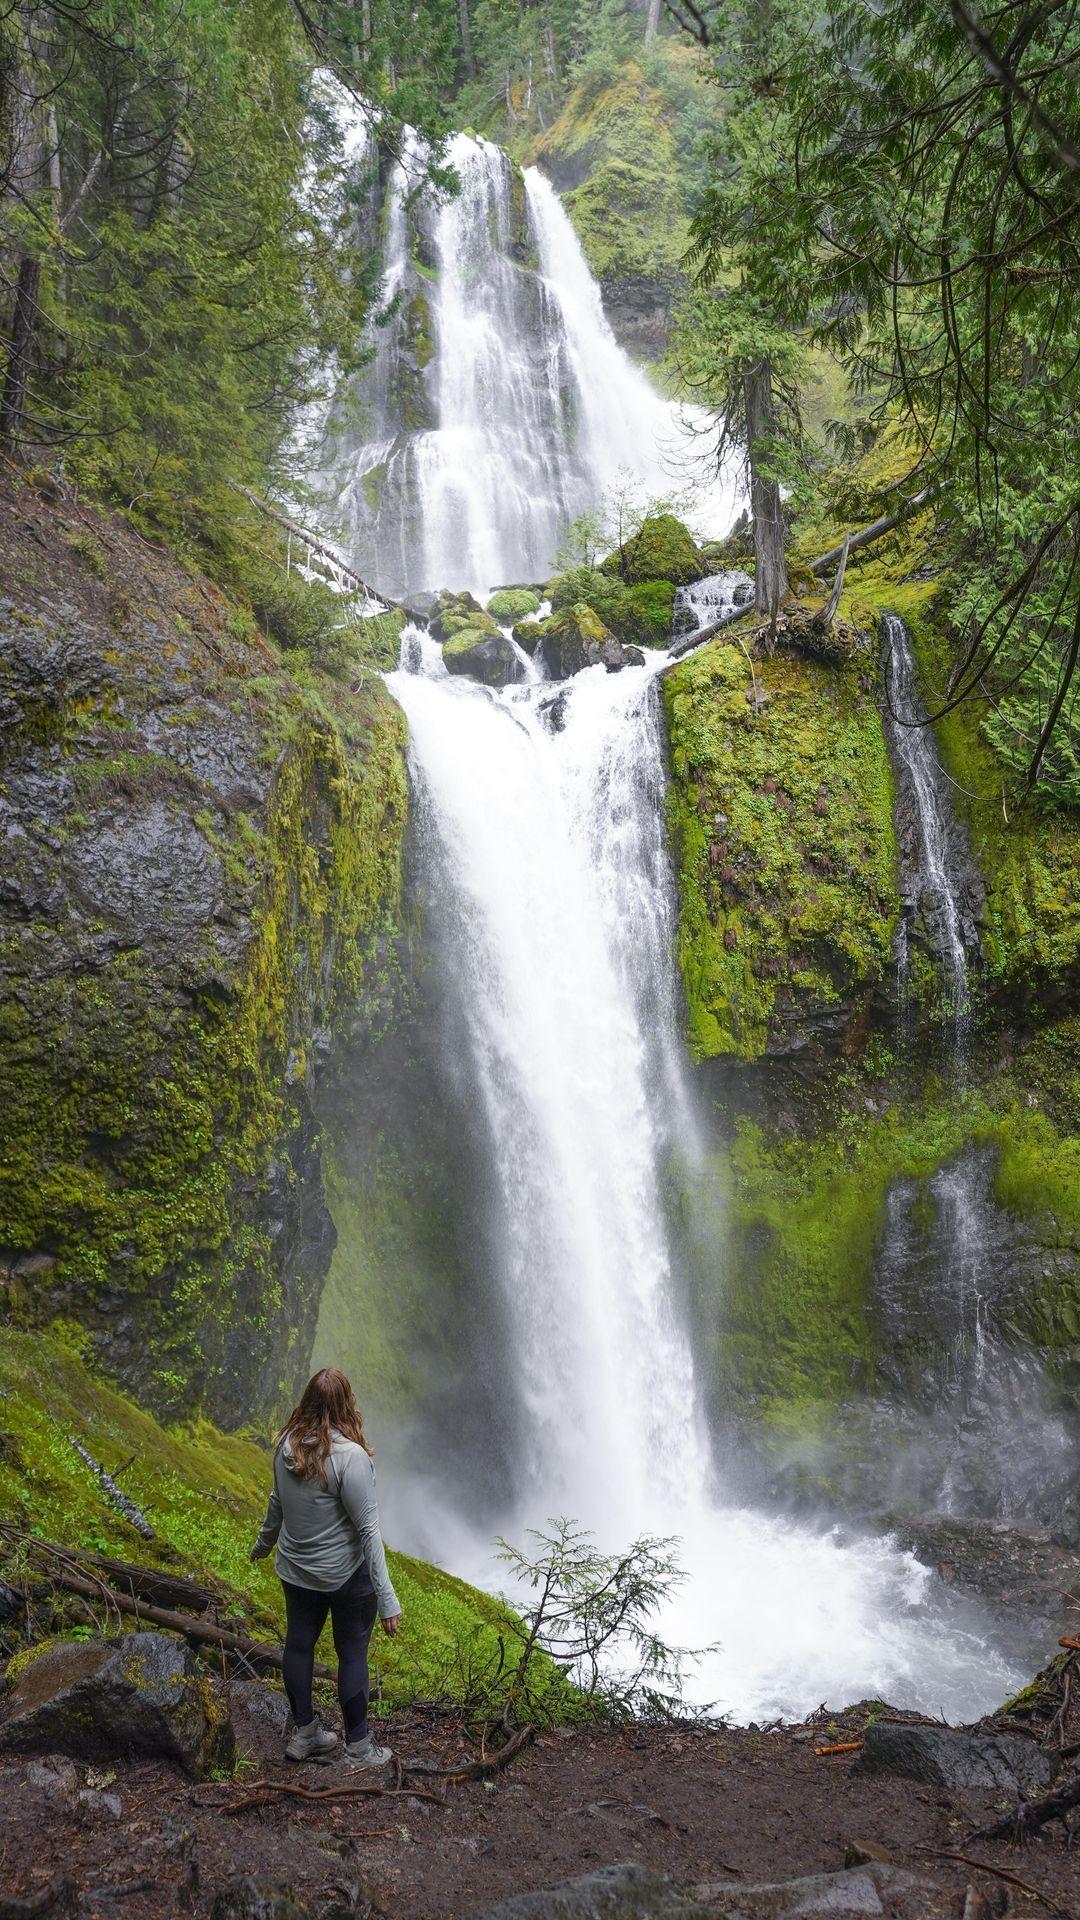 Over 2 million people visit Multnomah Falls every year (the tallest waterfall in Oregon!)